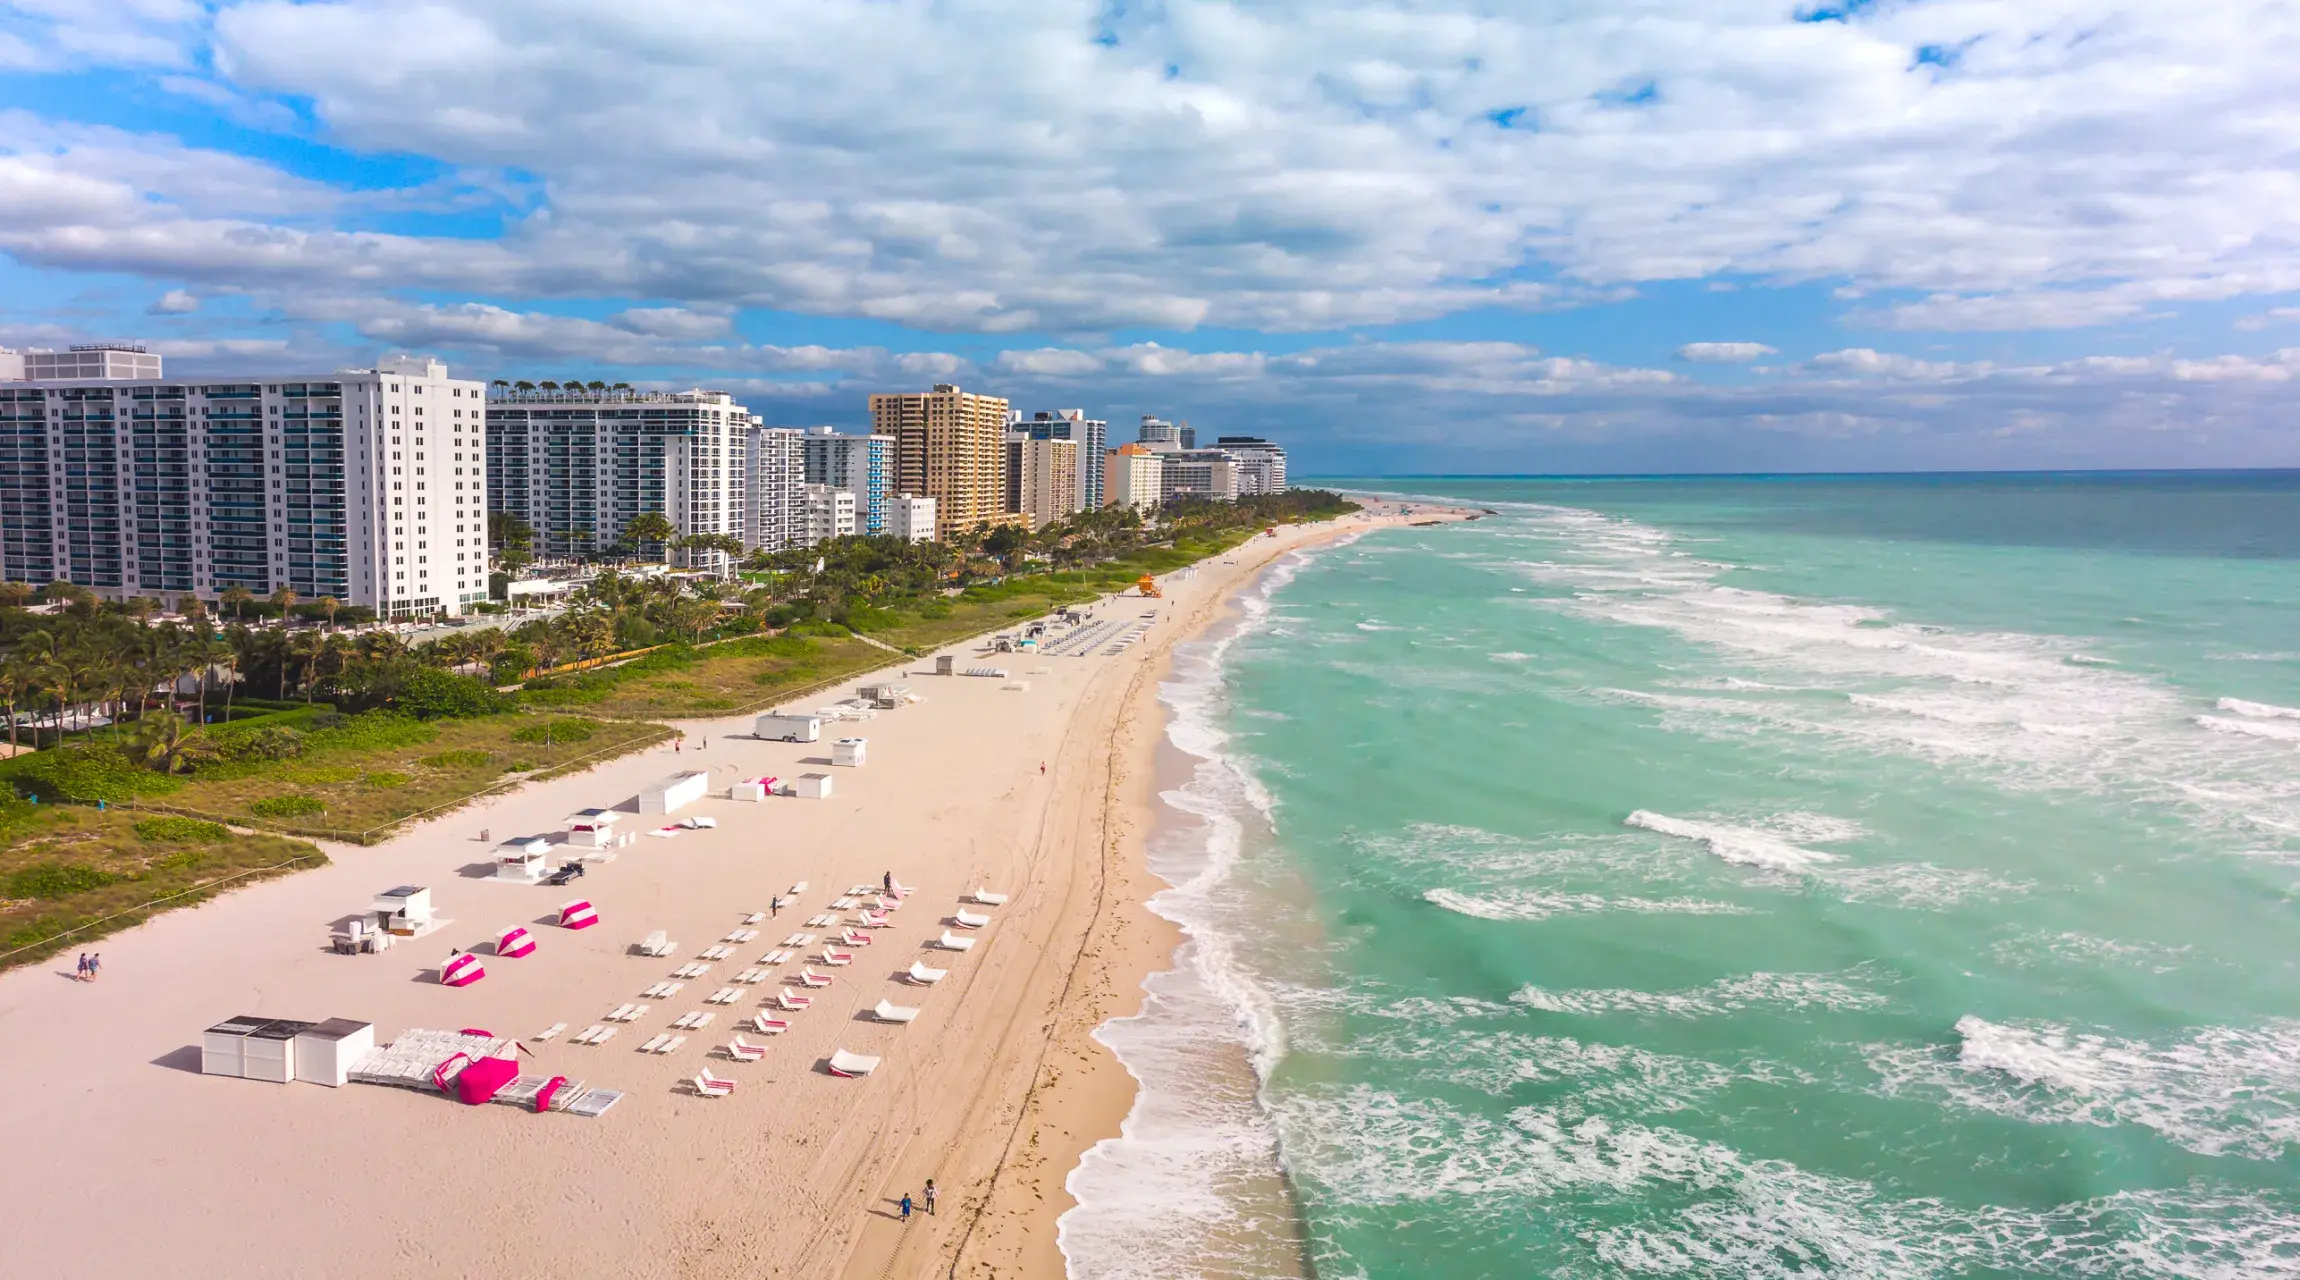 Why does a foreigner buy real estate in Florida?